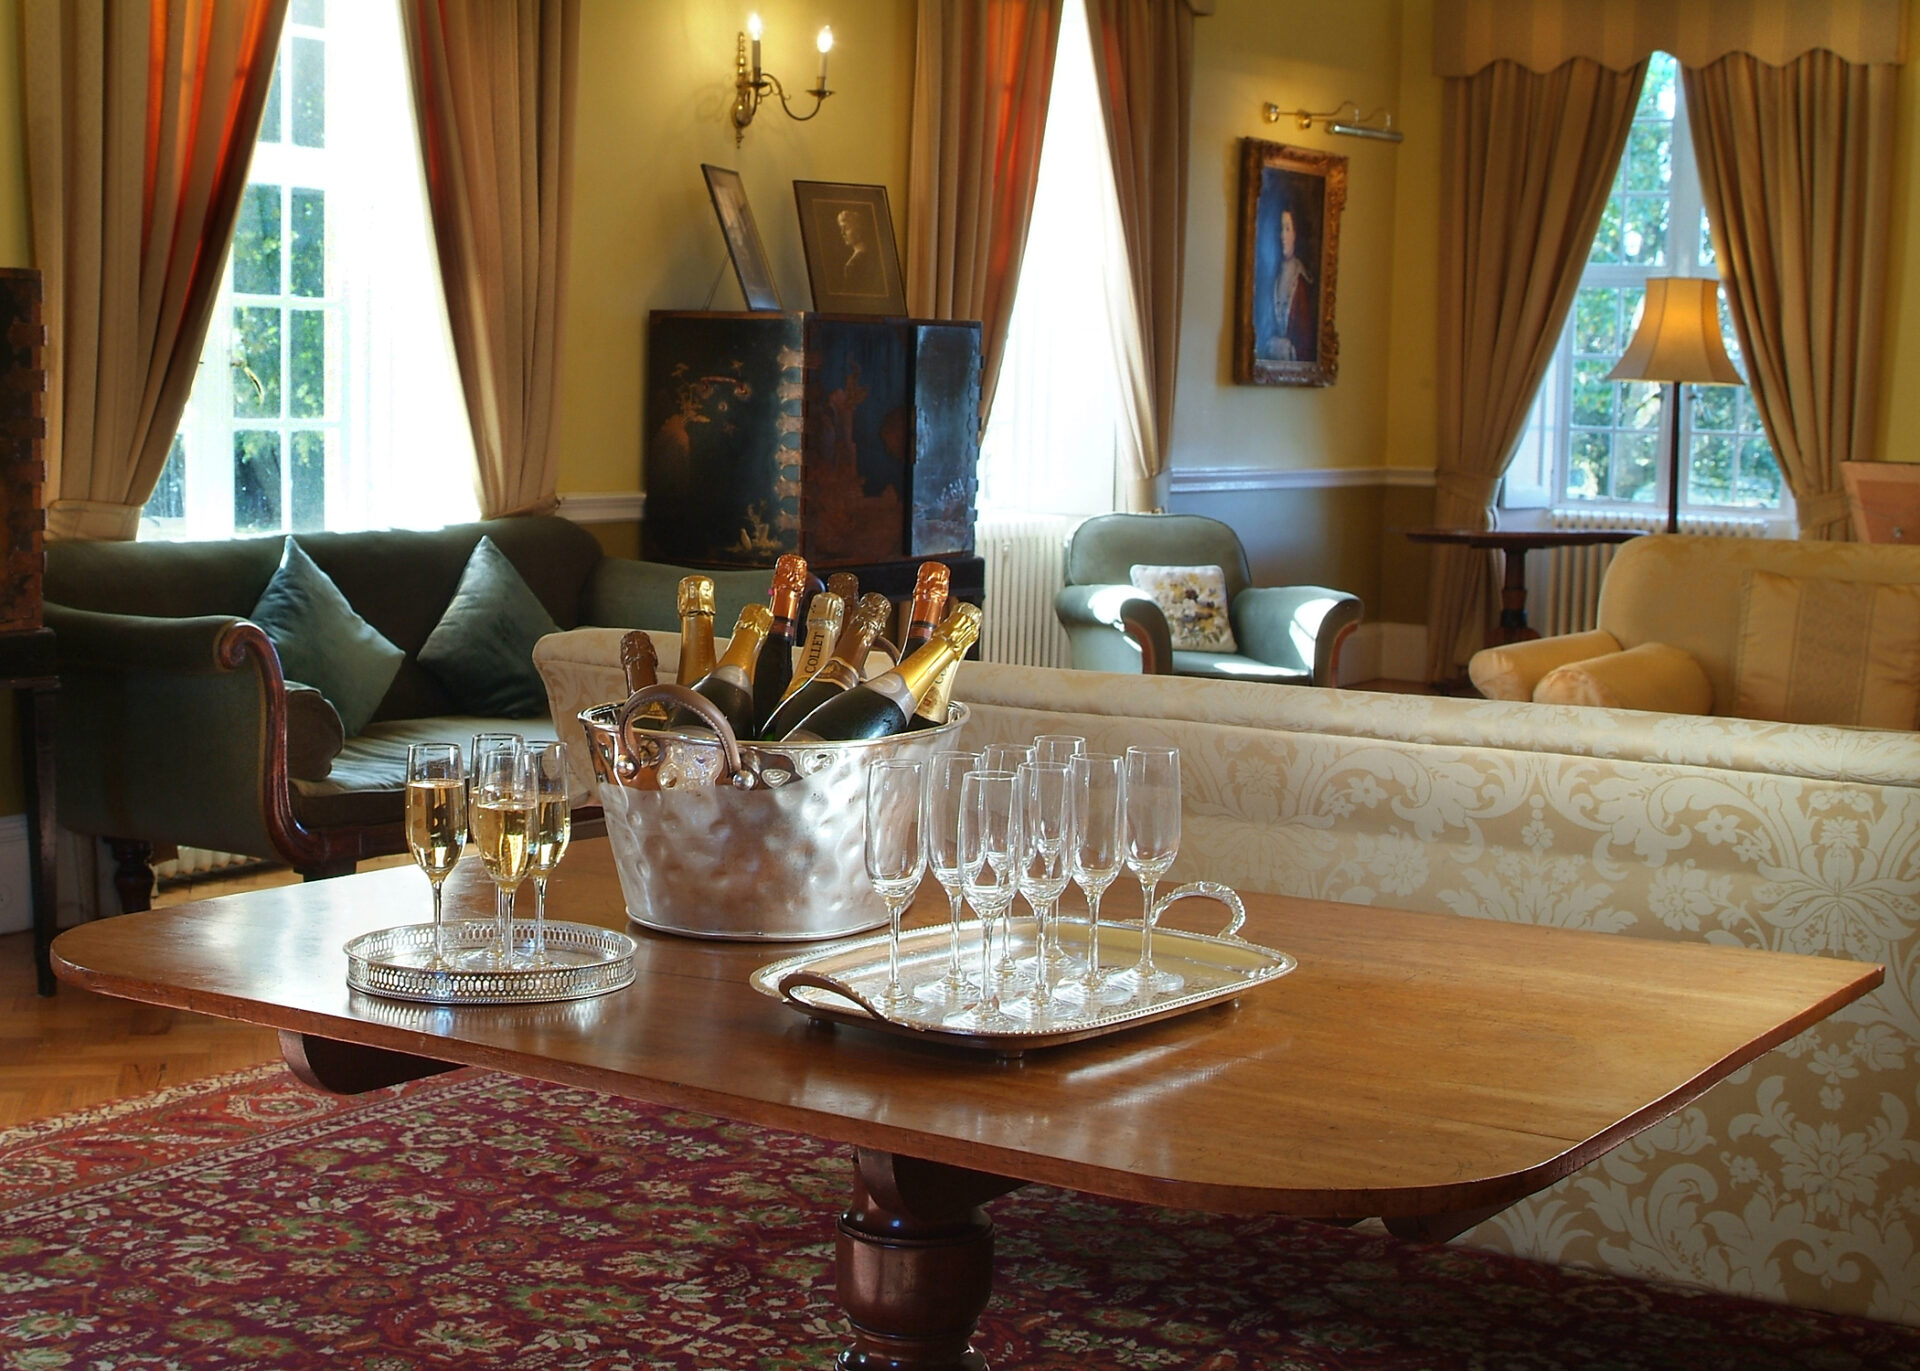 The Cumberland Lodge Drawing Room, set up for some celebrations.